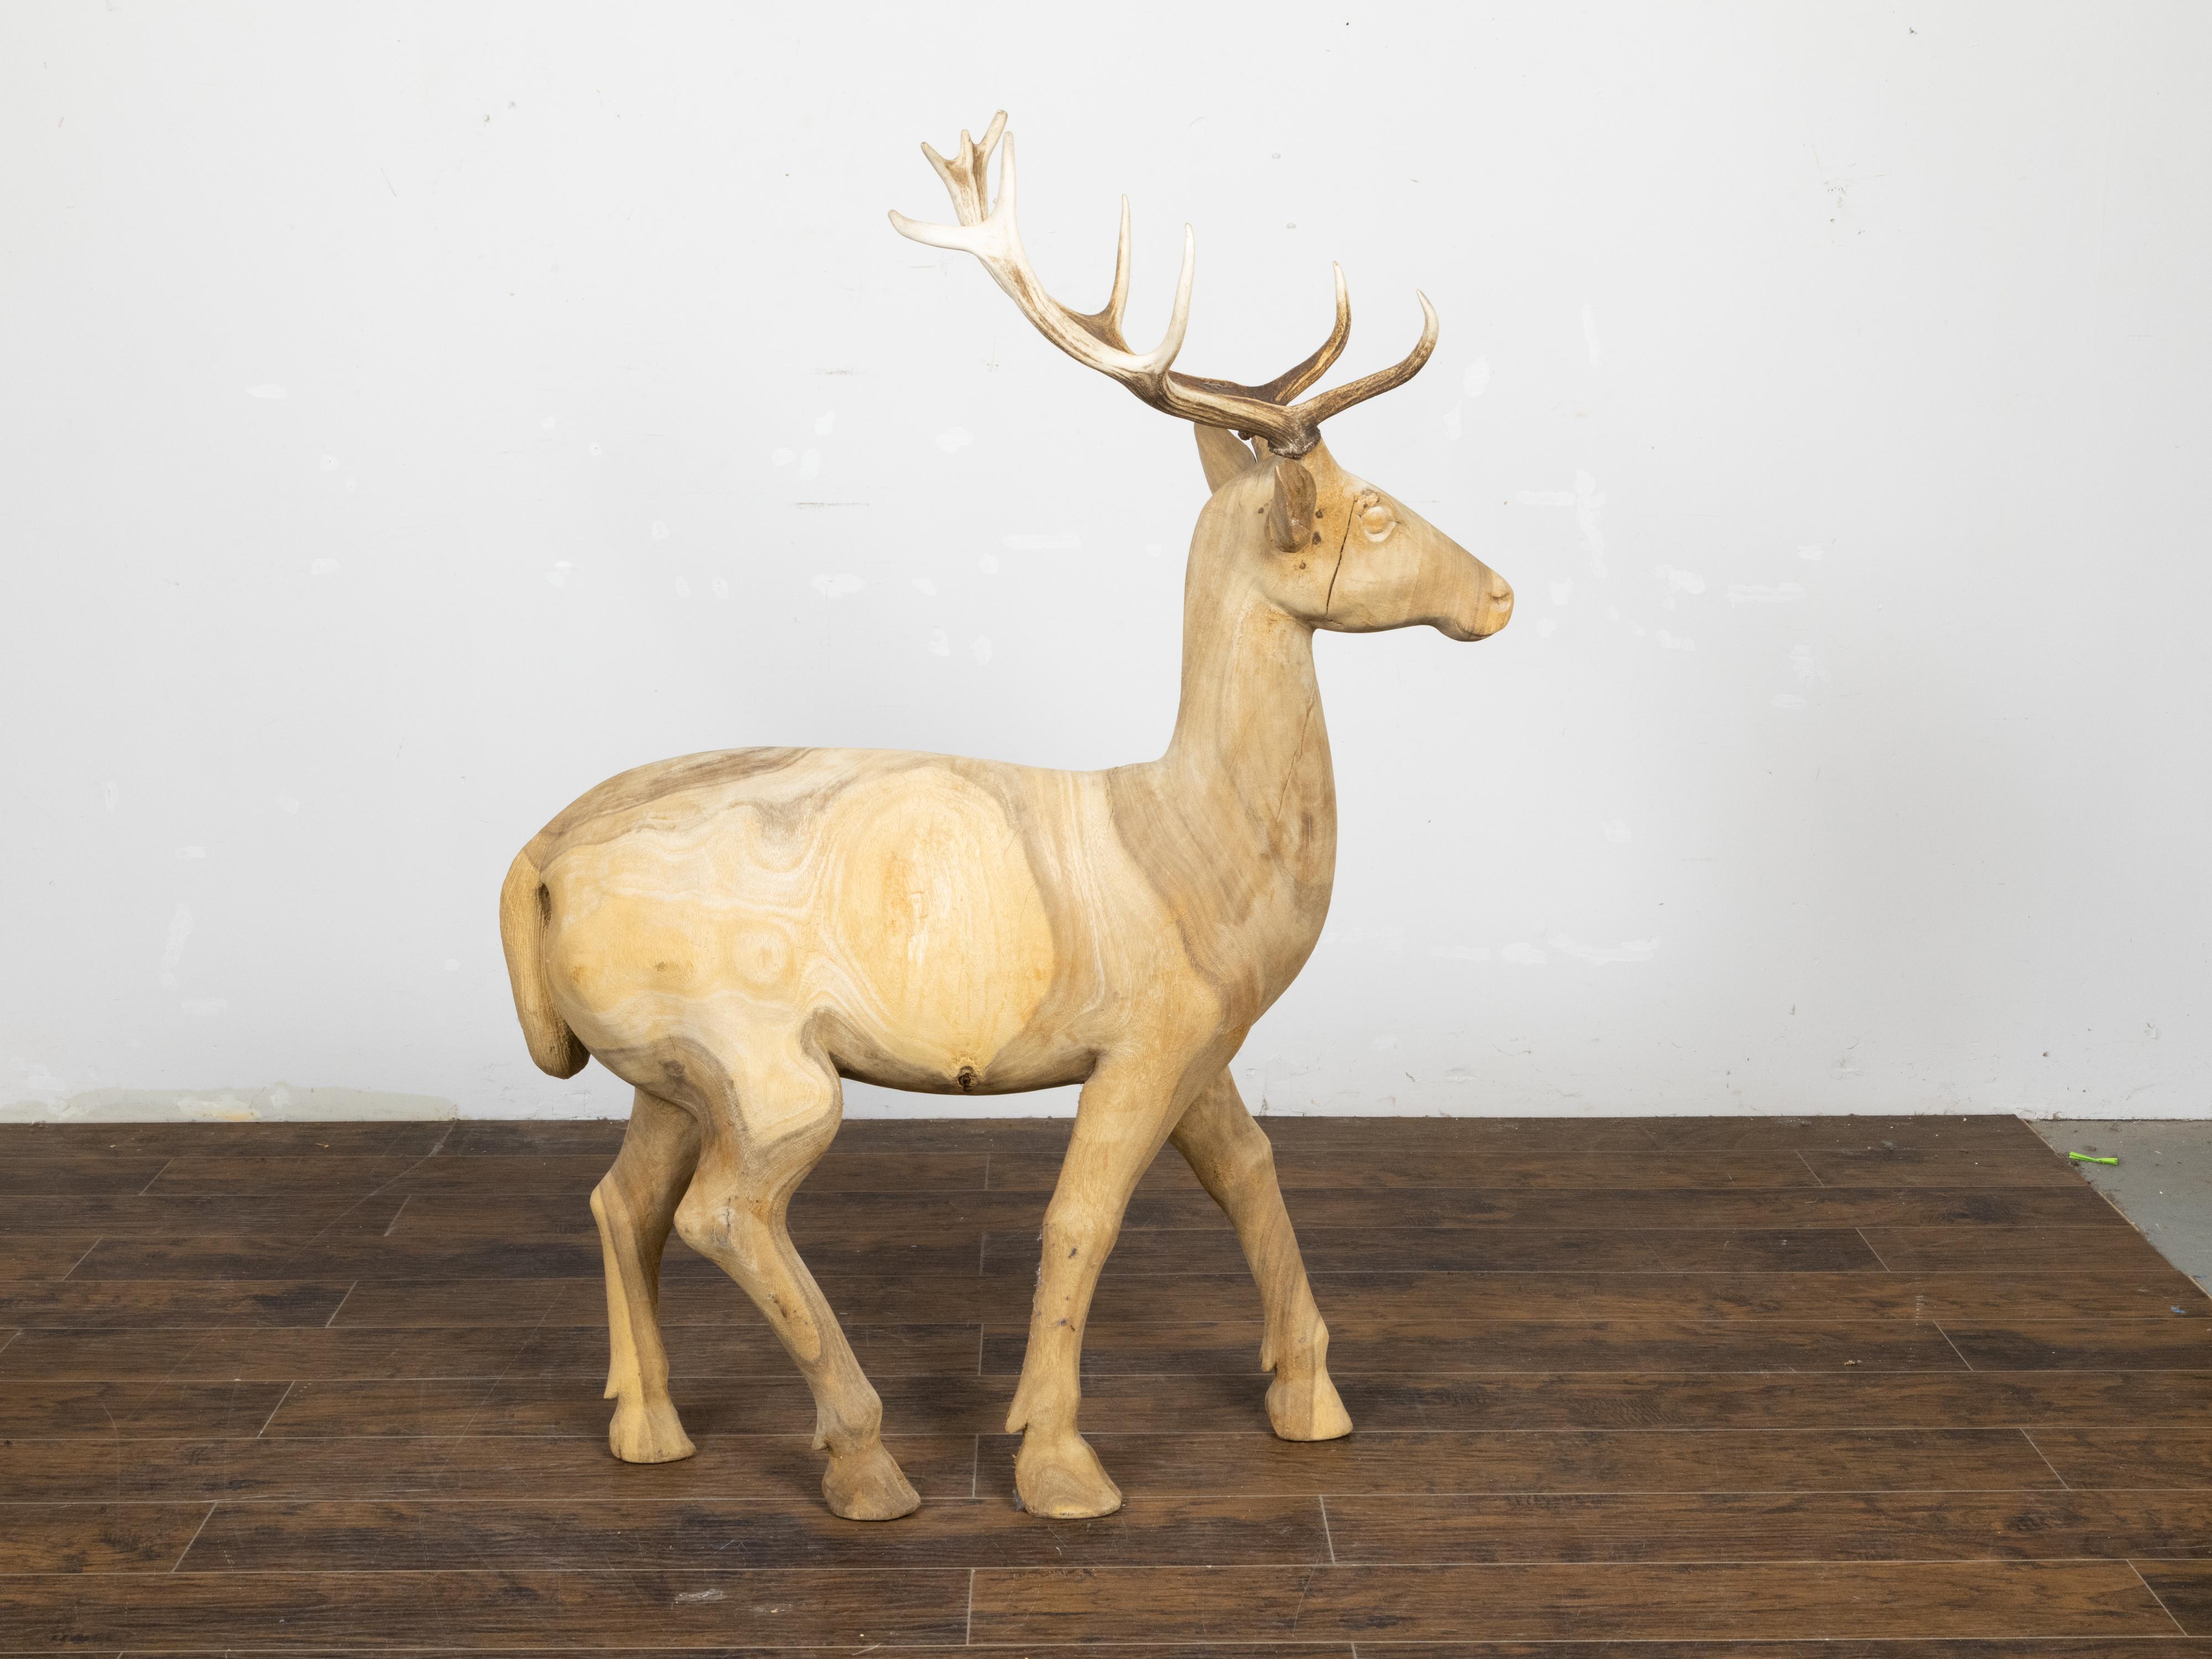 A life-size sculpture of a stag from the mid 20th century with antlers and natural patina. Hand-carved during the Midcentury period, this sculpture charms us with its life-size depiction of a majestic walking stag. Boasting a natural patina